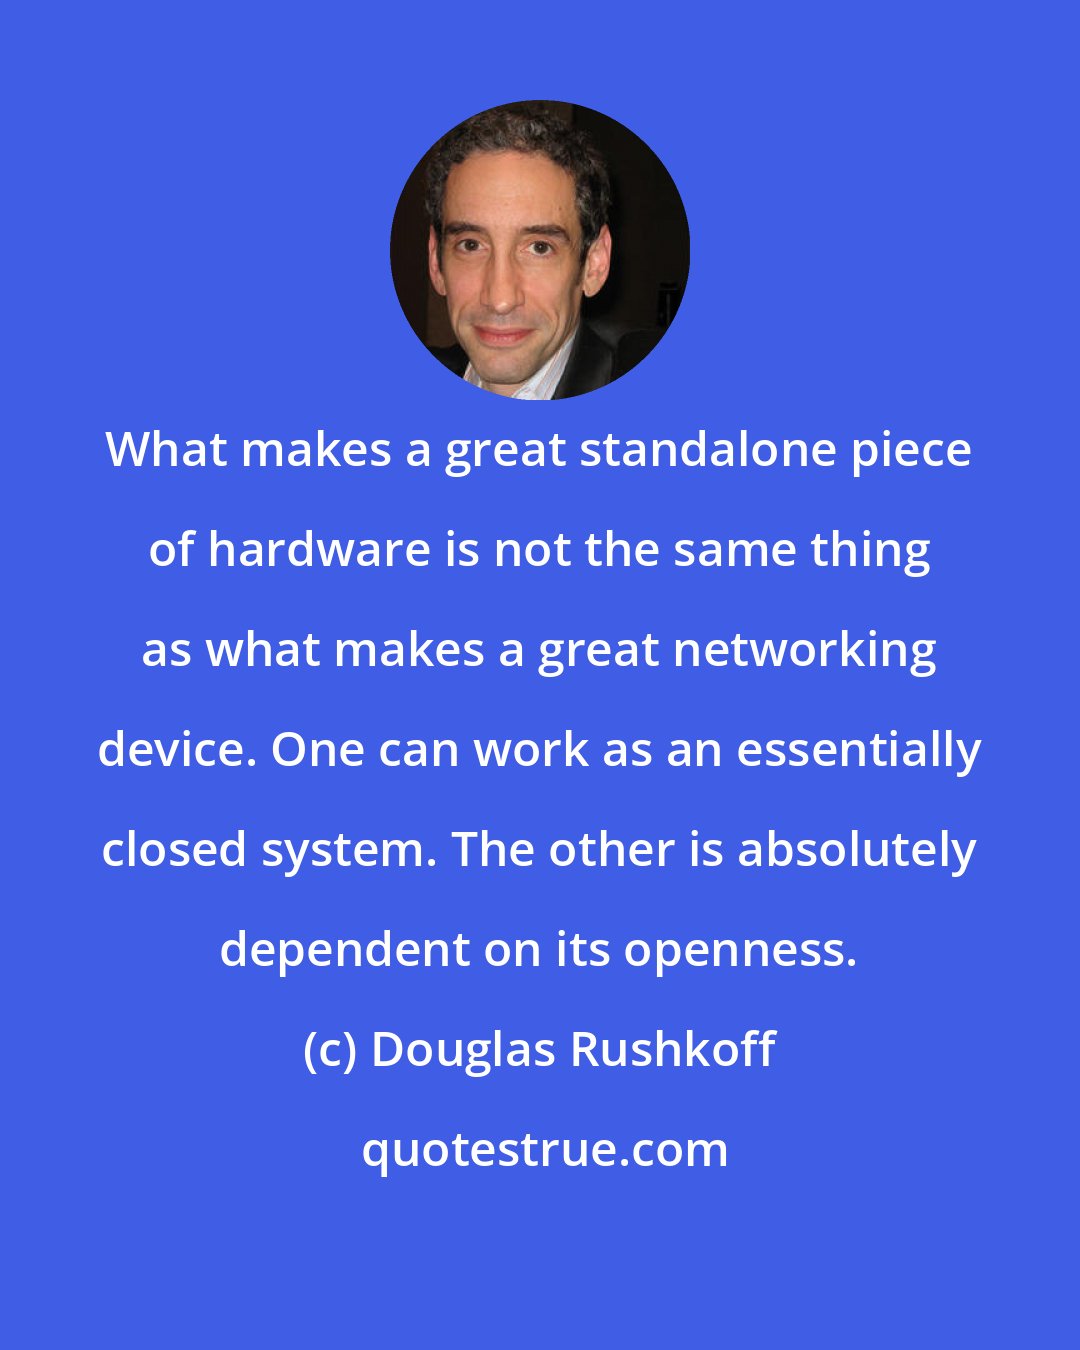 Douglas Rushkoff: What makes a great standalone piece of hardware is not the same thing as what makes a great networking device. One can work as an essentially closed system. The other is absolutely dependent on its openness.